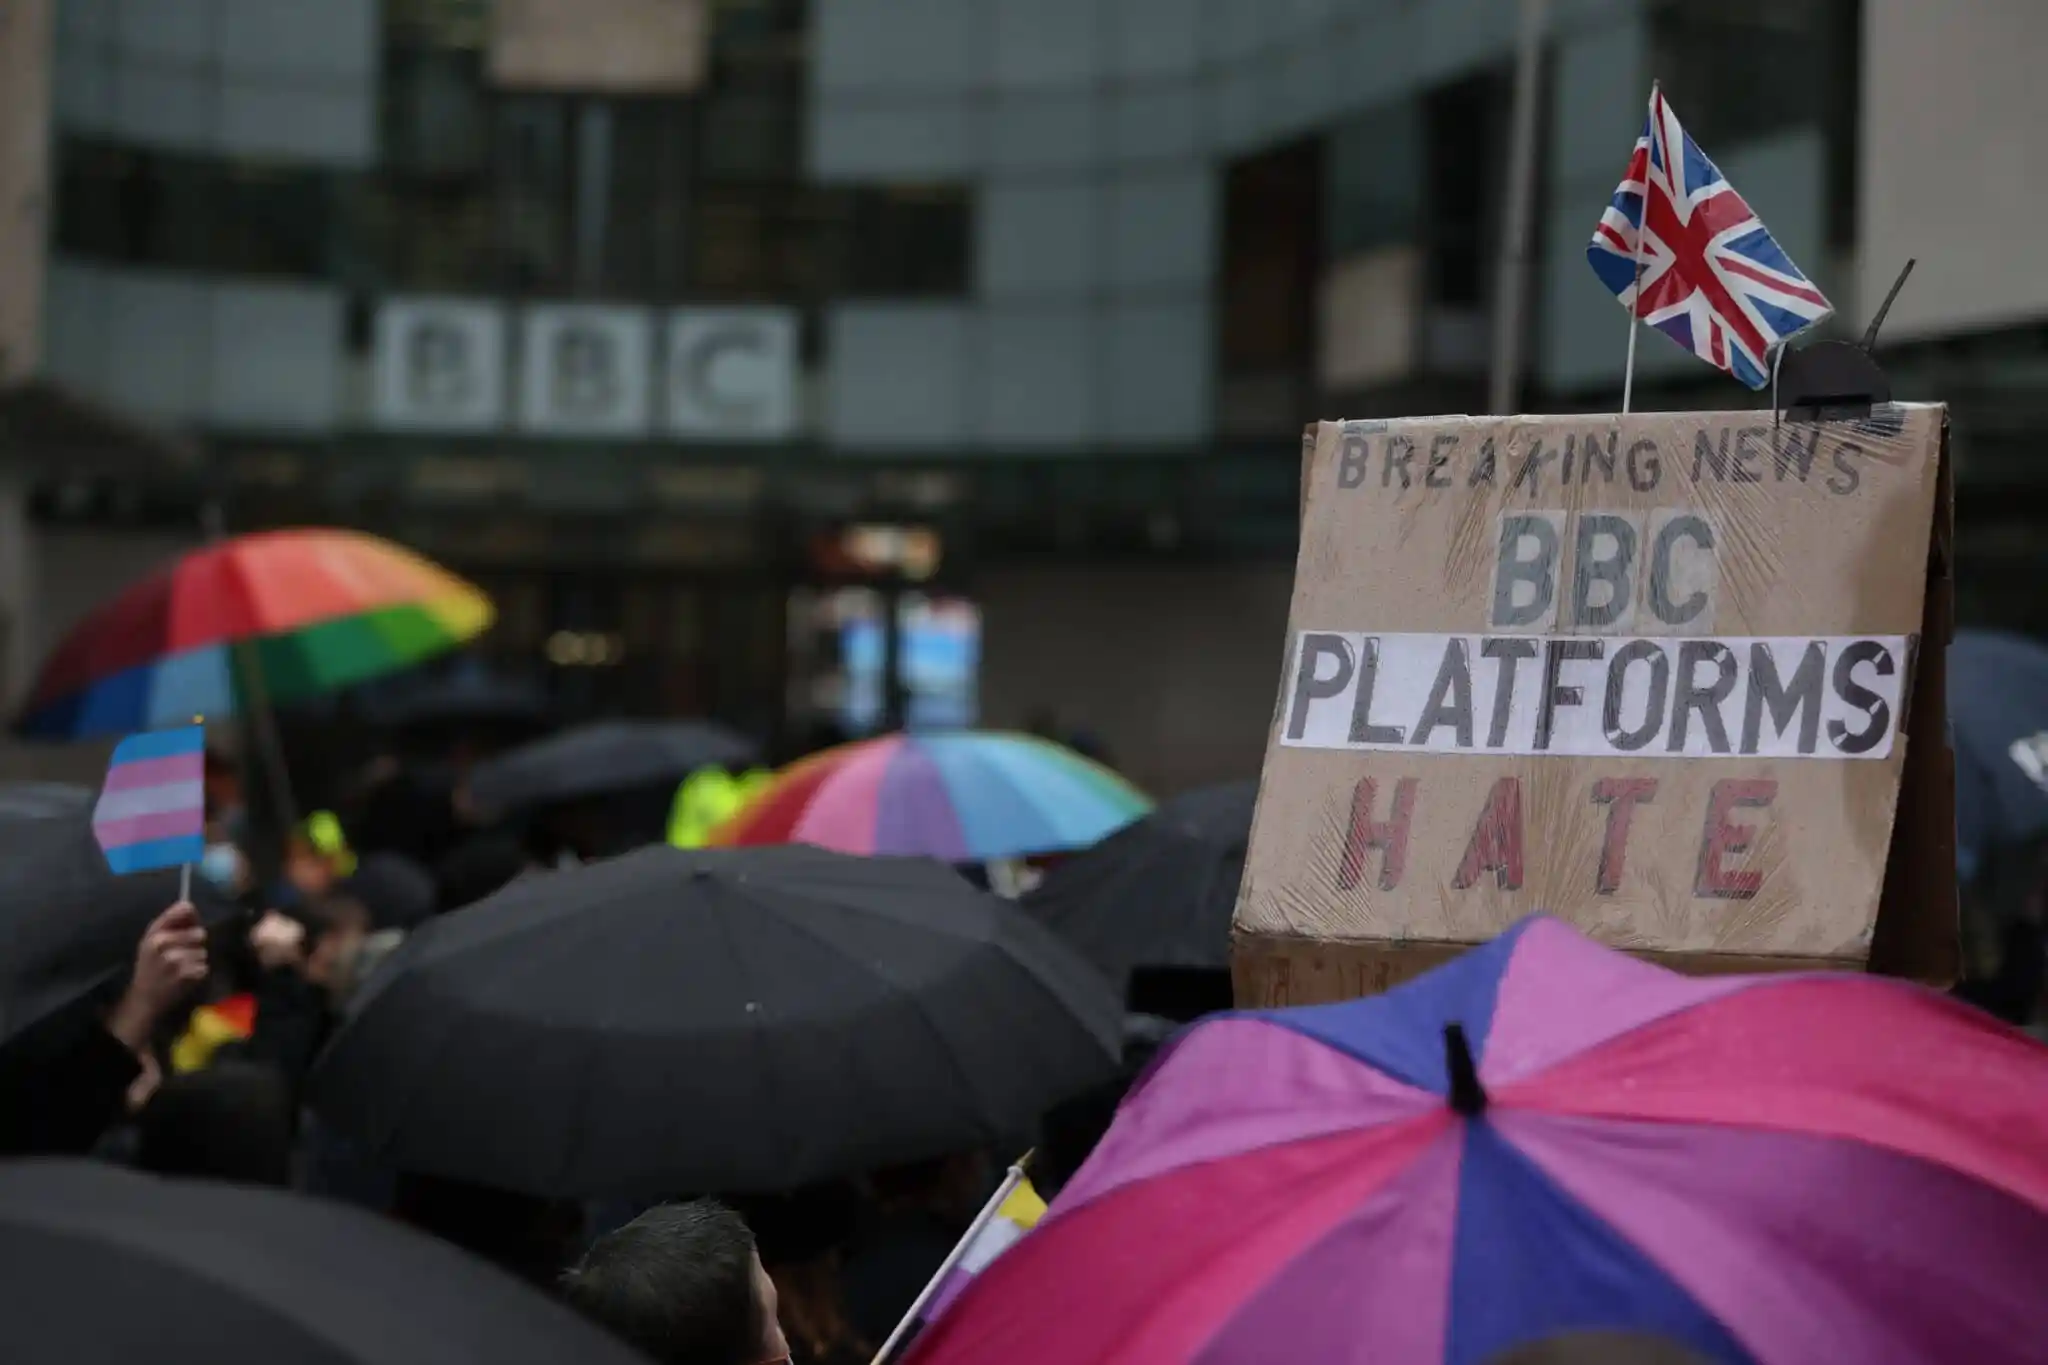 BBC and LGBT rights: The good, the bad and the unforgivable